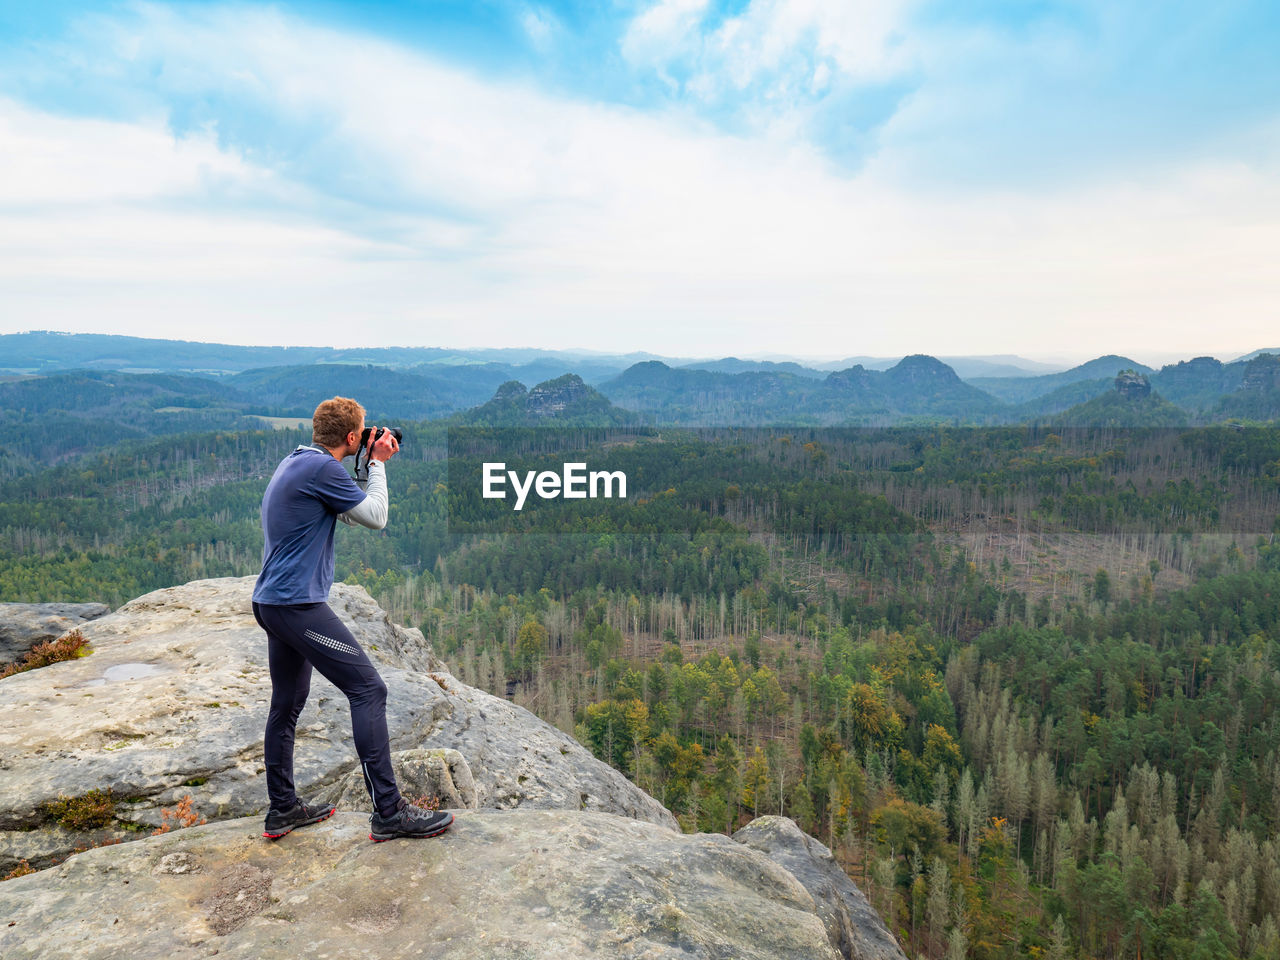 Man takes photo of landscape. photographer with eye at viewfinder of camera on stay on cliff